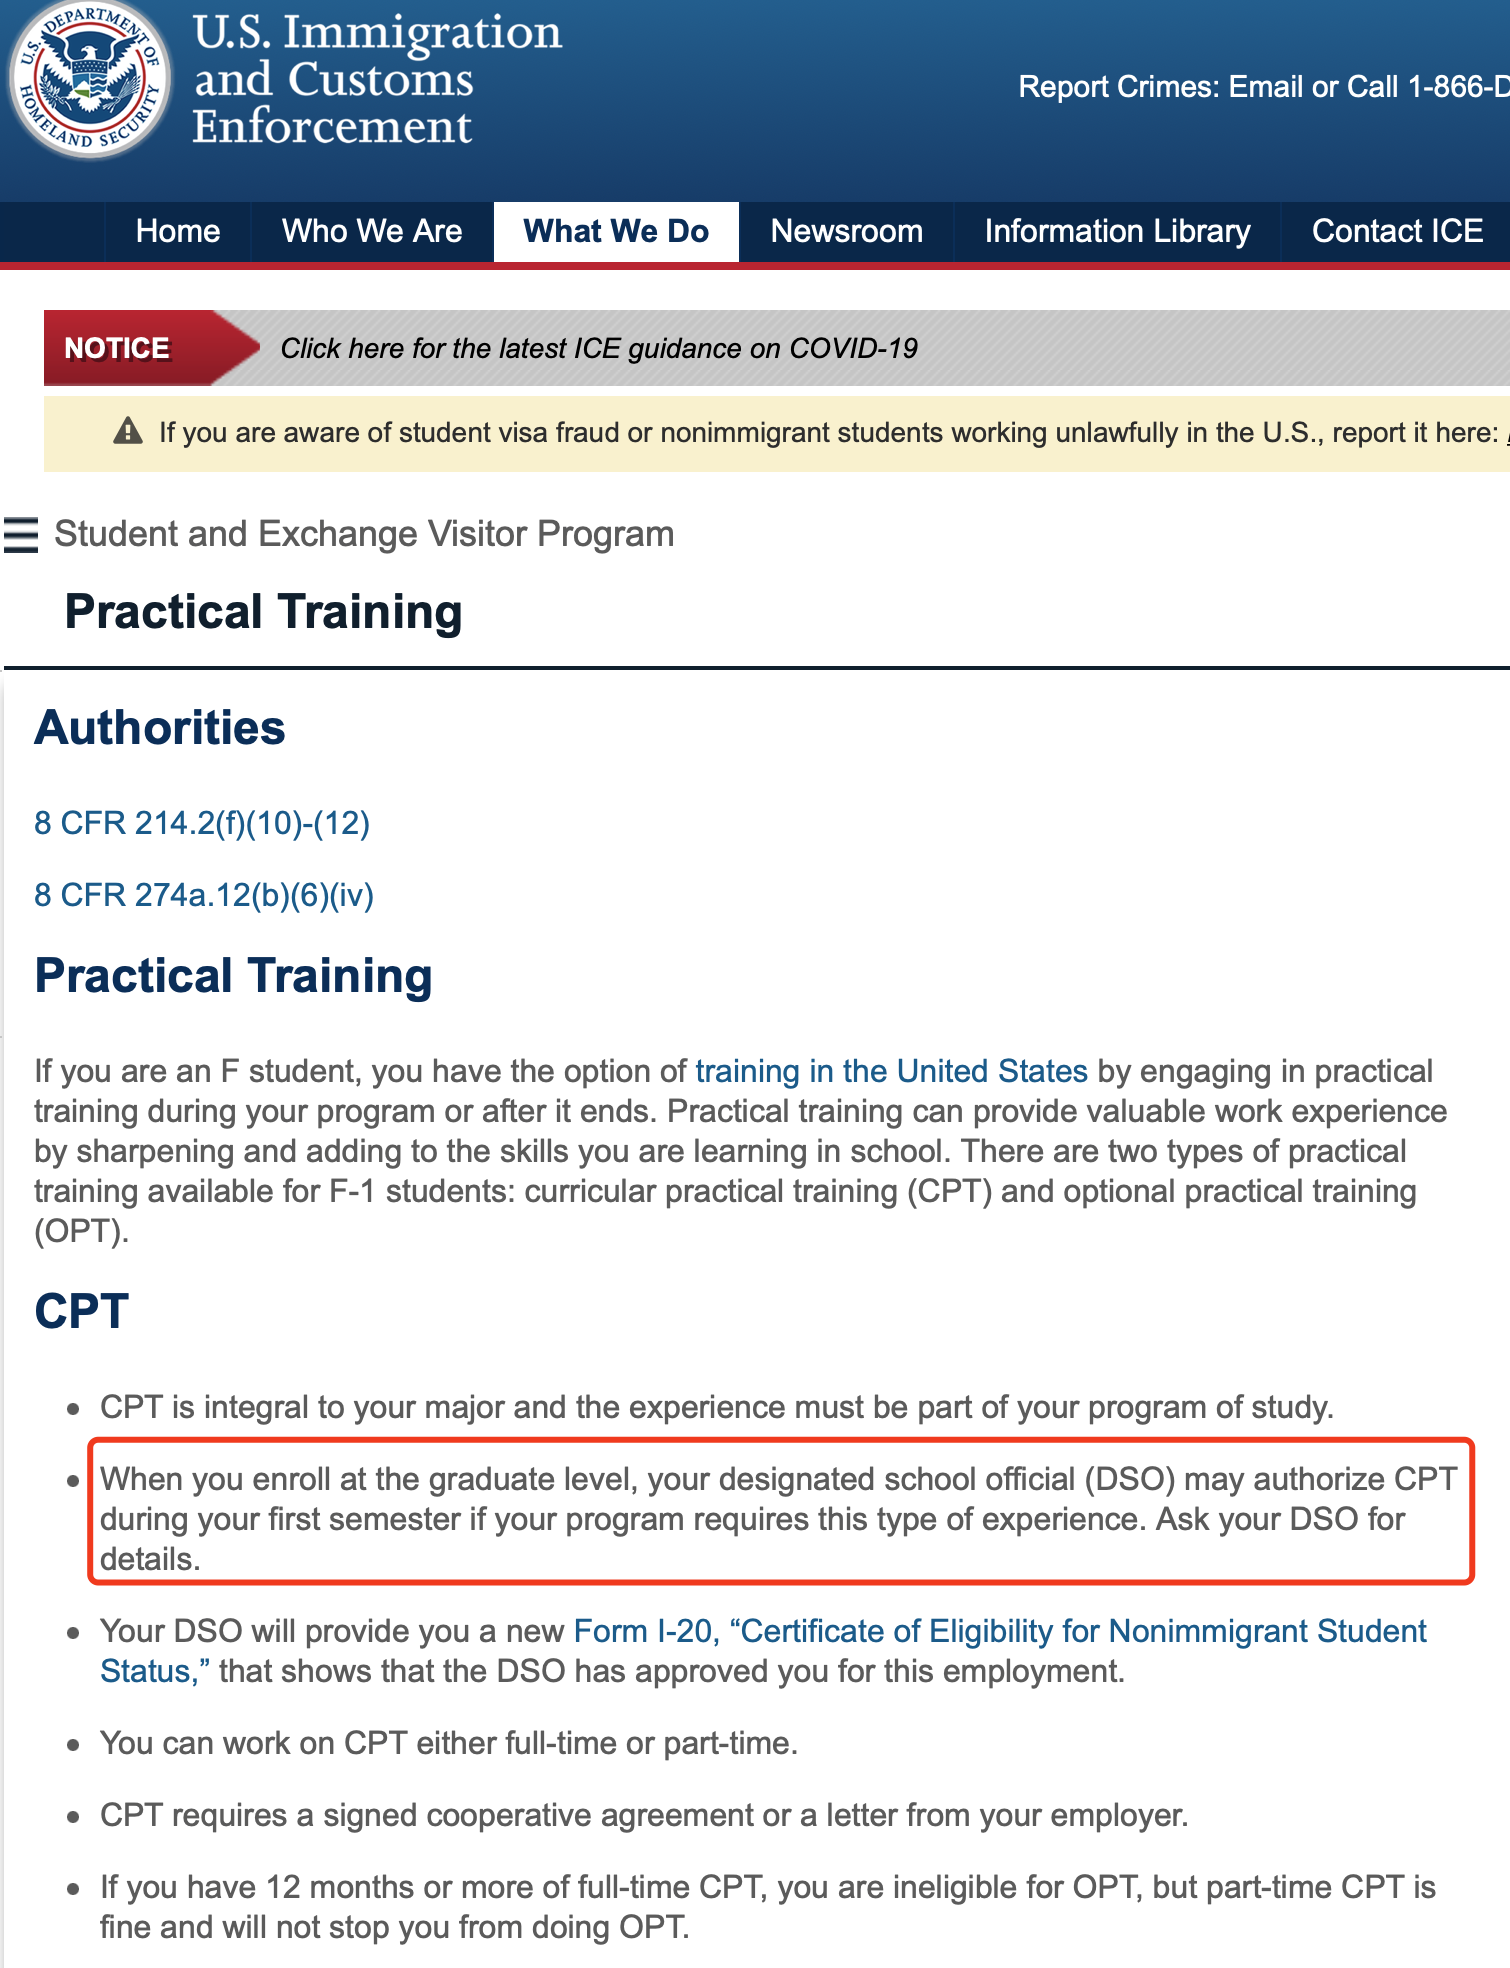 USCIS Regulation about CPT